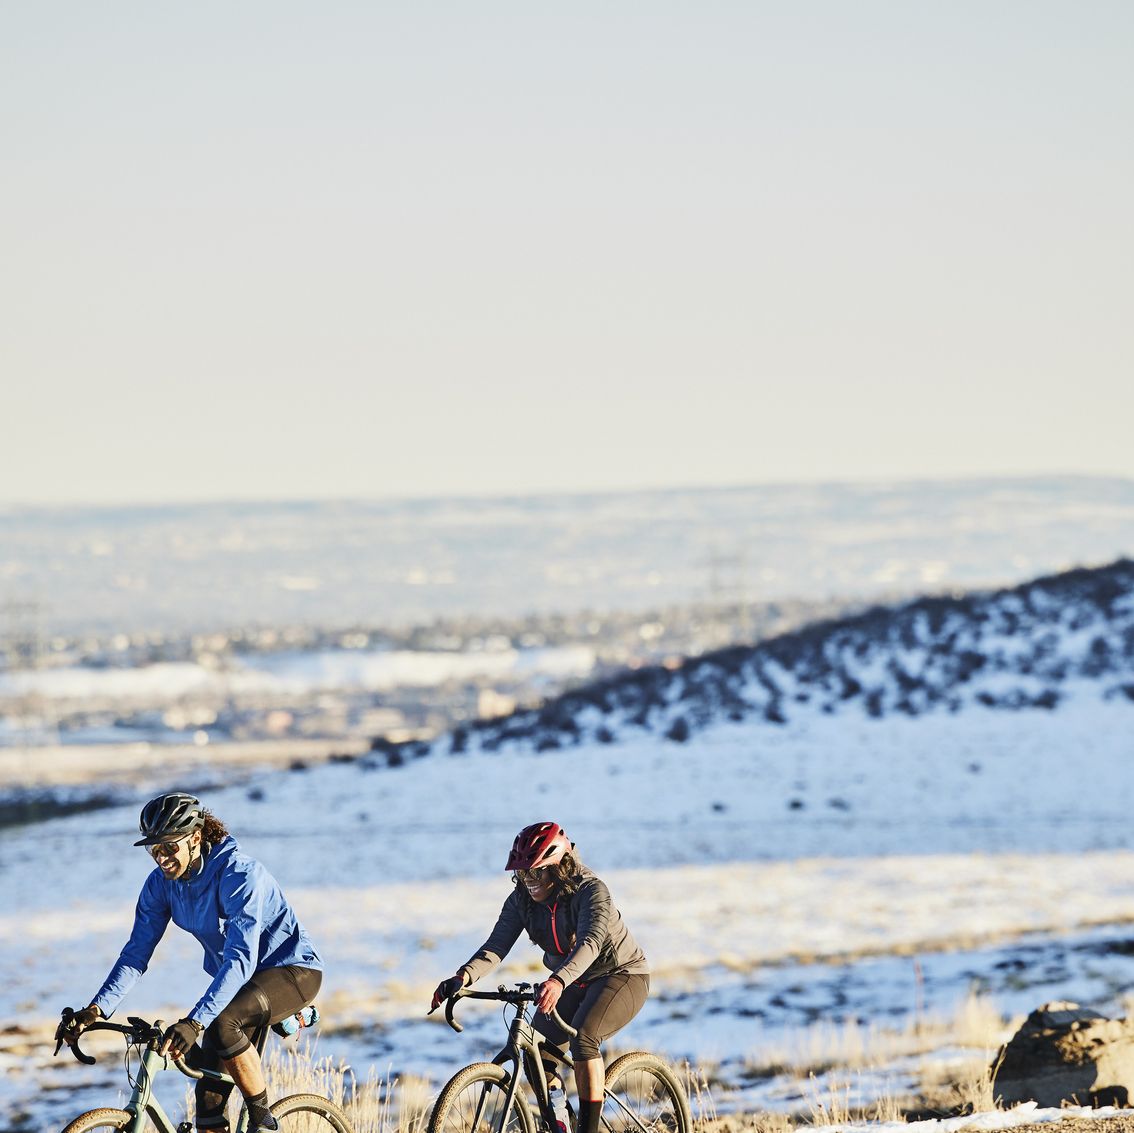 Best winter cycling clothing: A guide on what to wear in winter